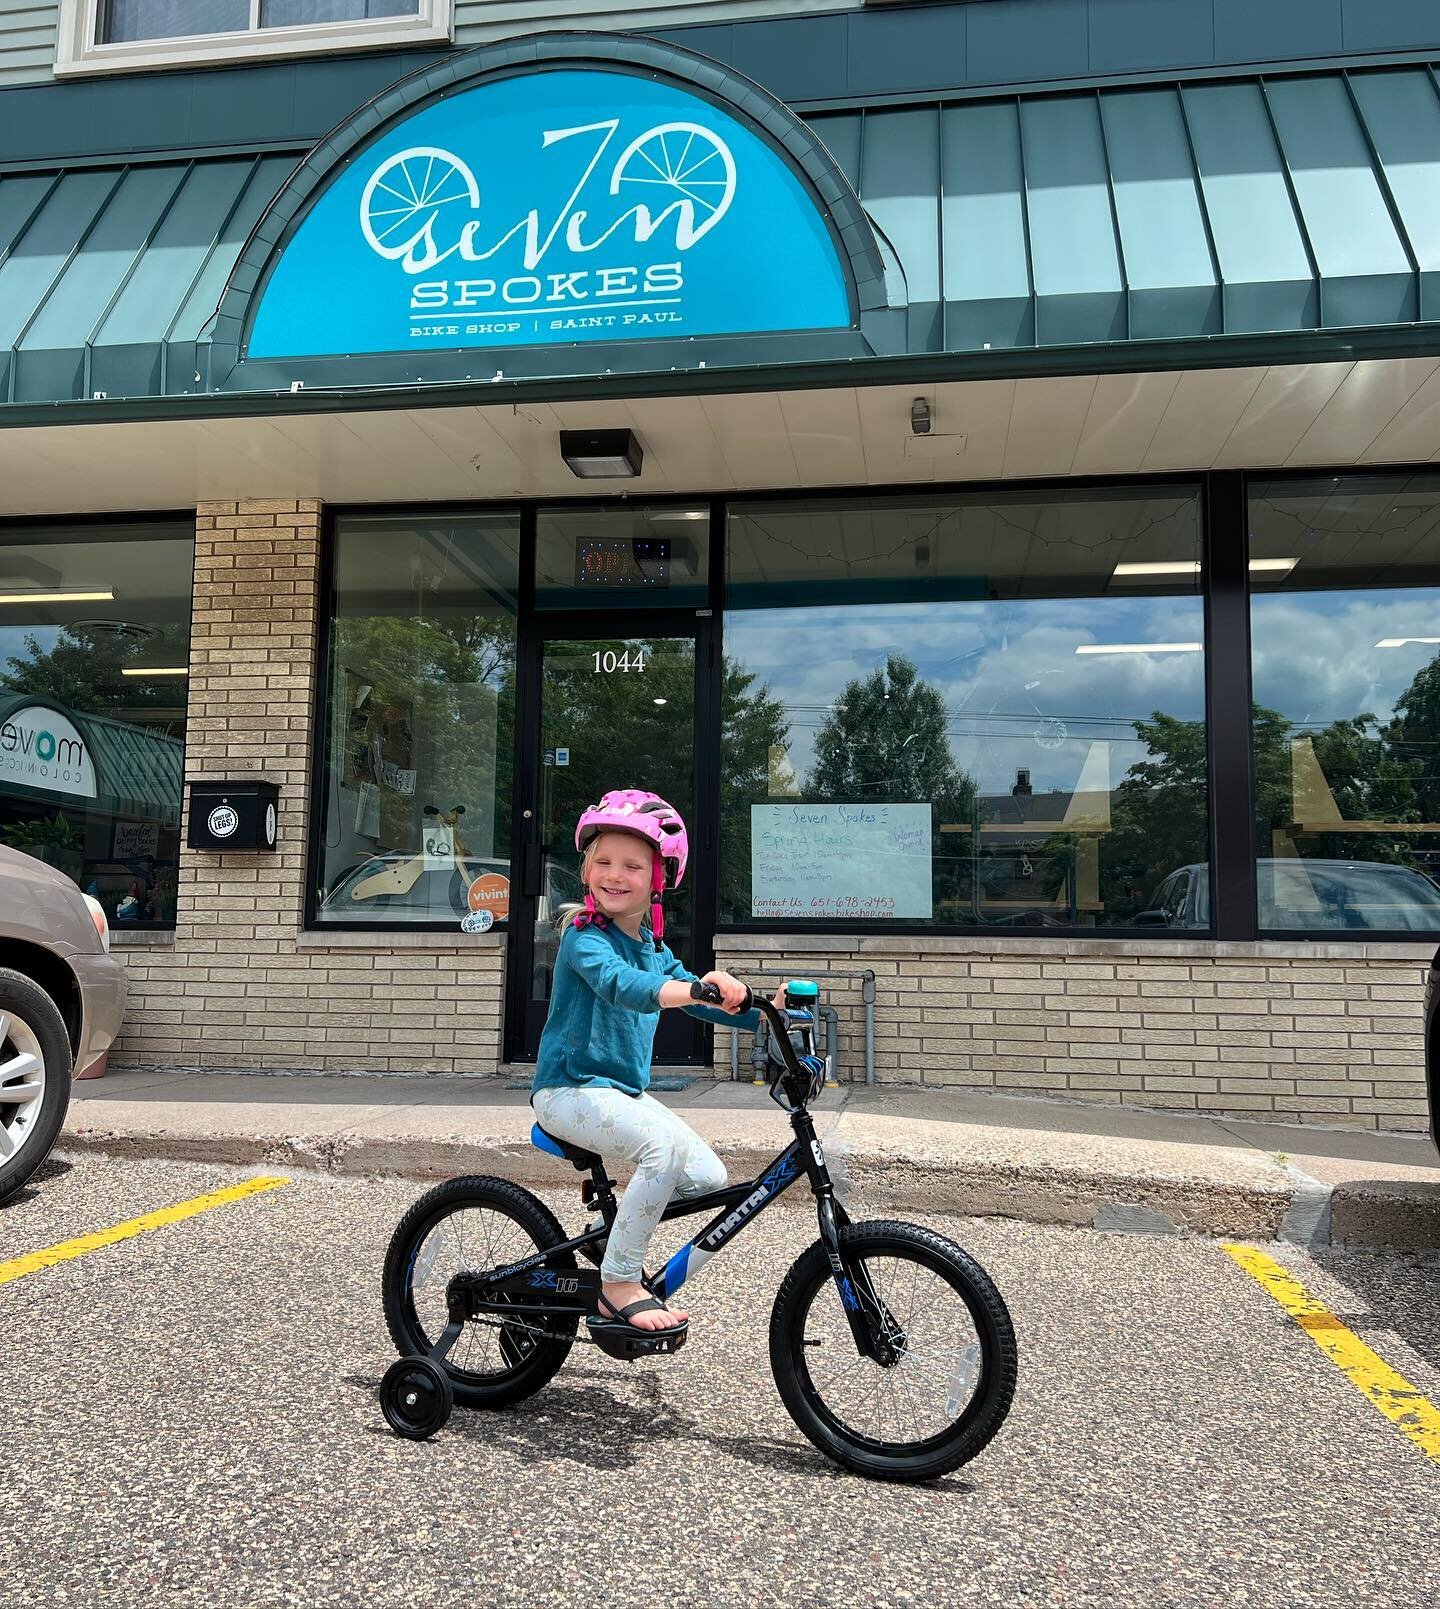 &ldquo;Can I keep this bike forever?&rdquo;
Yes, yes you can! Happy #7spokesnewbikeday Miss C! Your enthusiasm is contagious 🥰 #moregirlskonbikes #girlpower #supportlocal #womanownedbikeshop @sunbicycles @lemhelmets